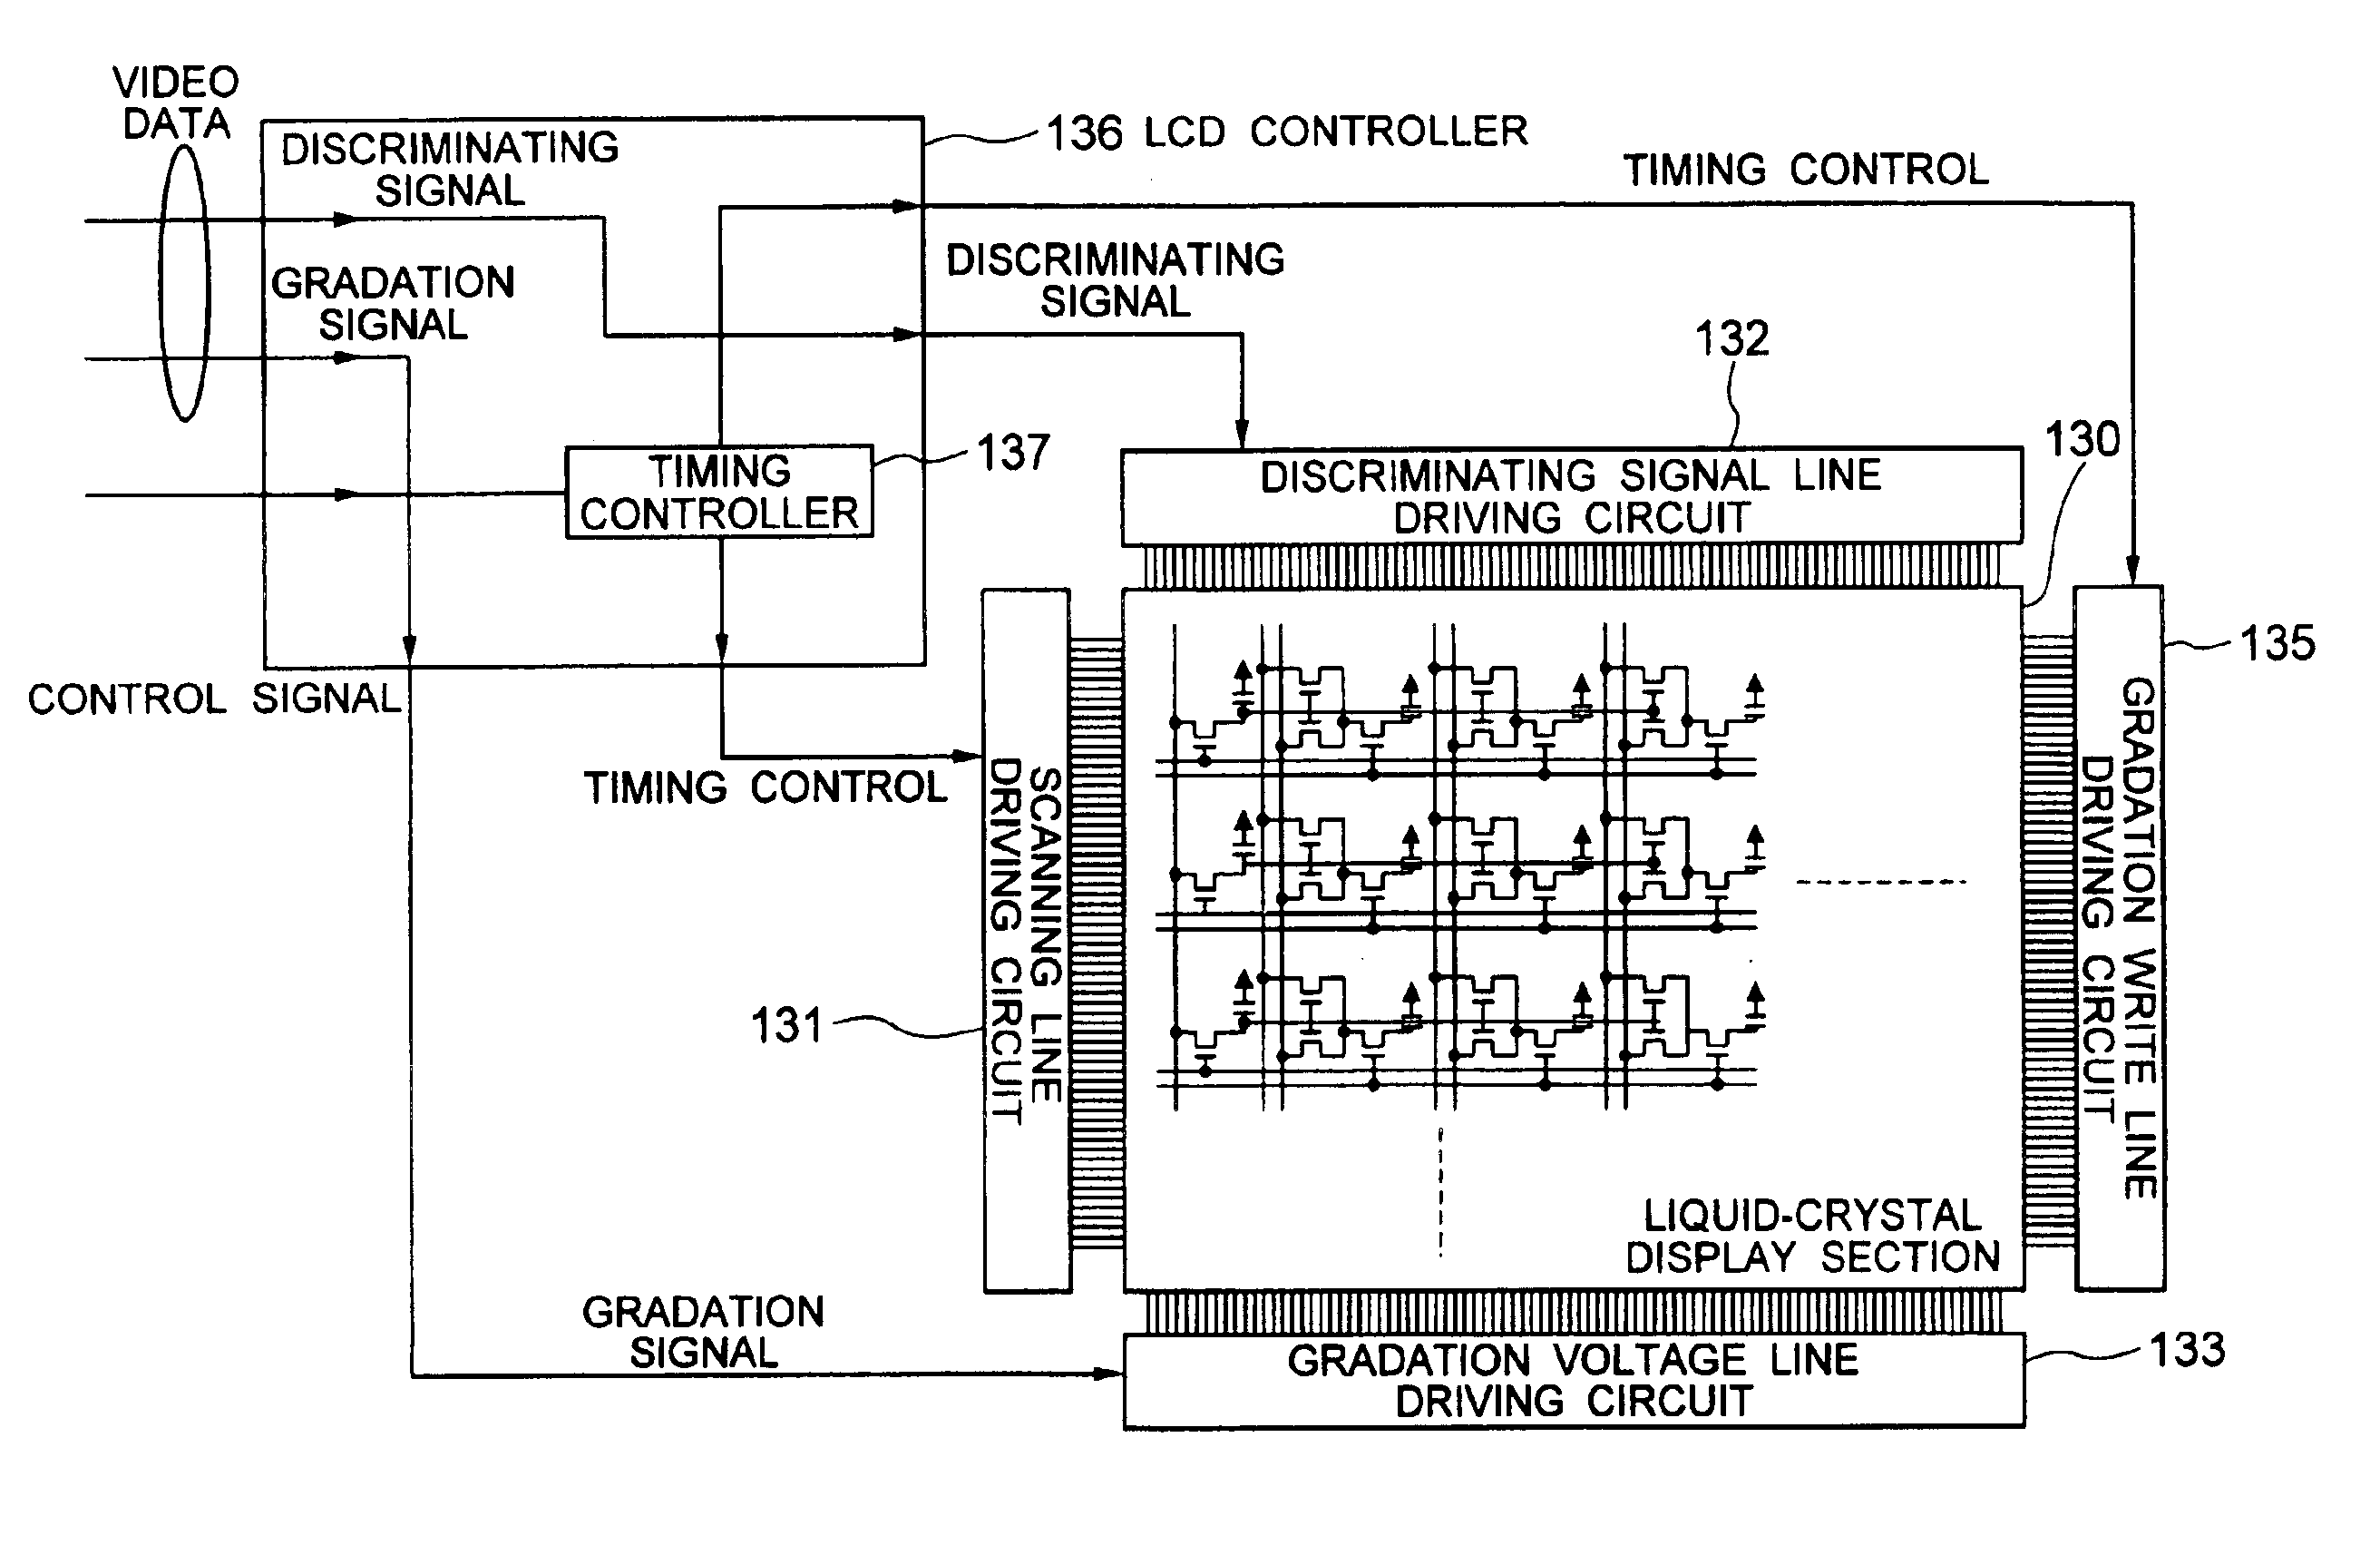 Display device for decompressing compressed image data received